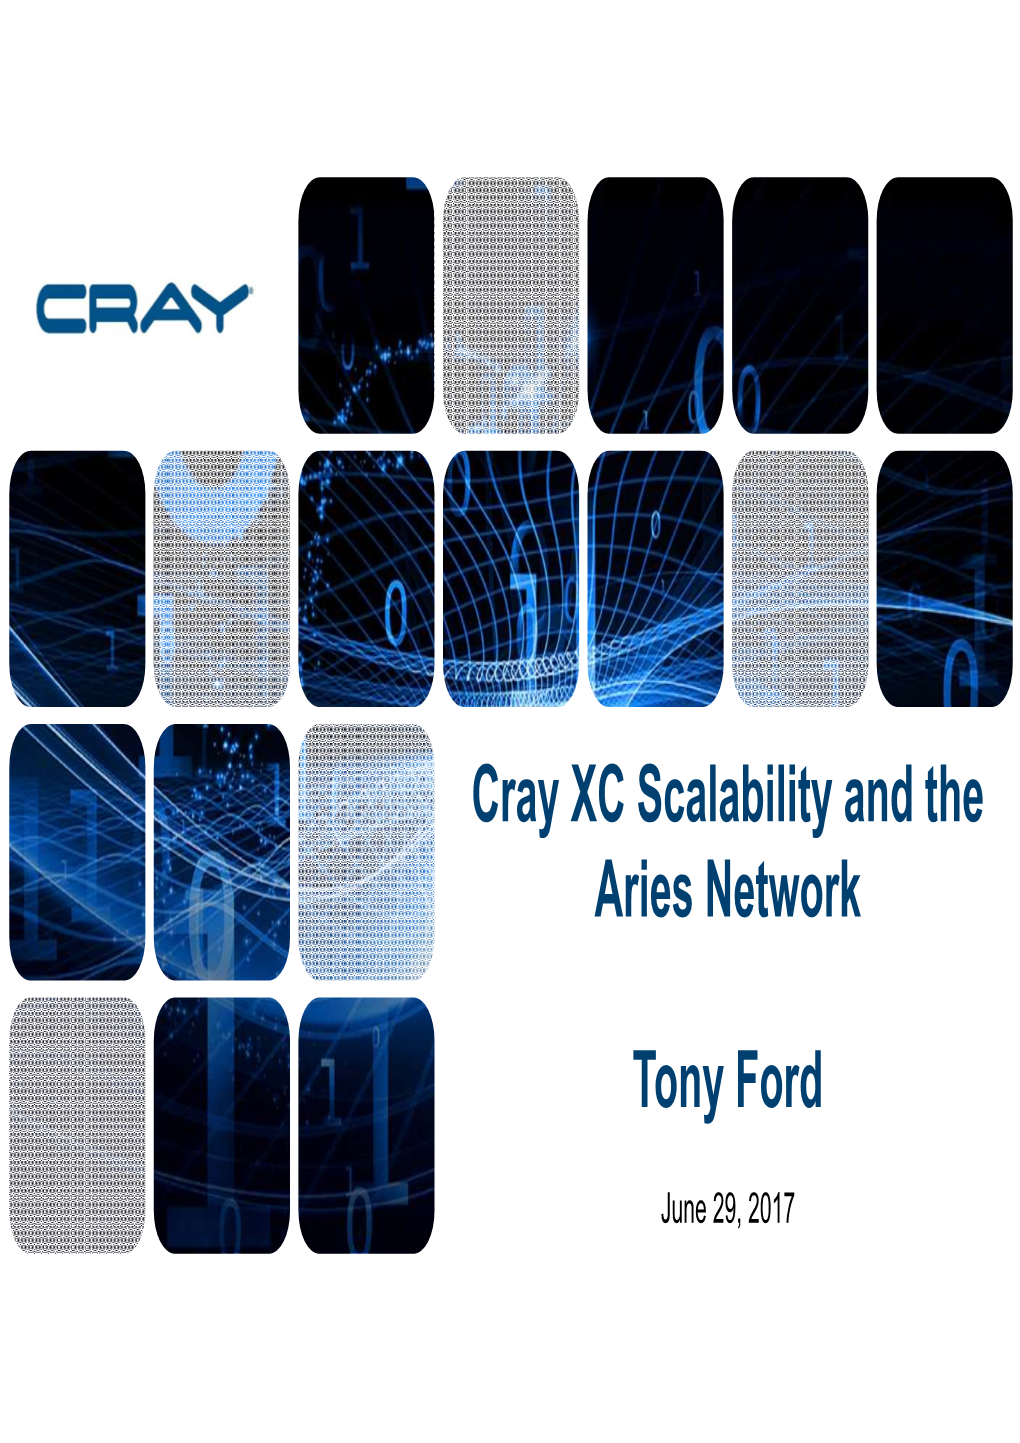 Cray XC Scalability and the Aries Network Tony Ford